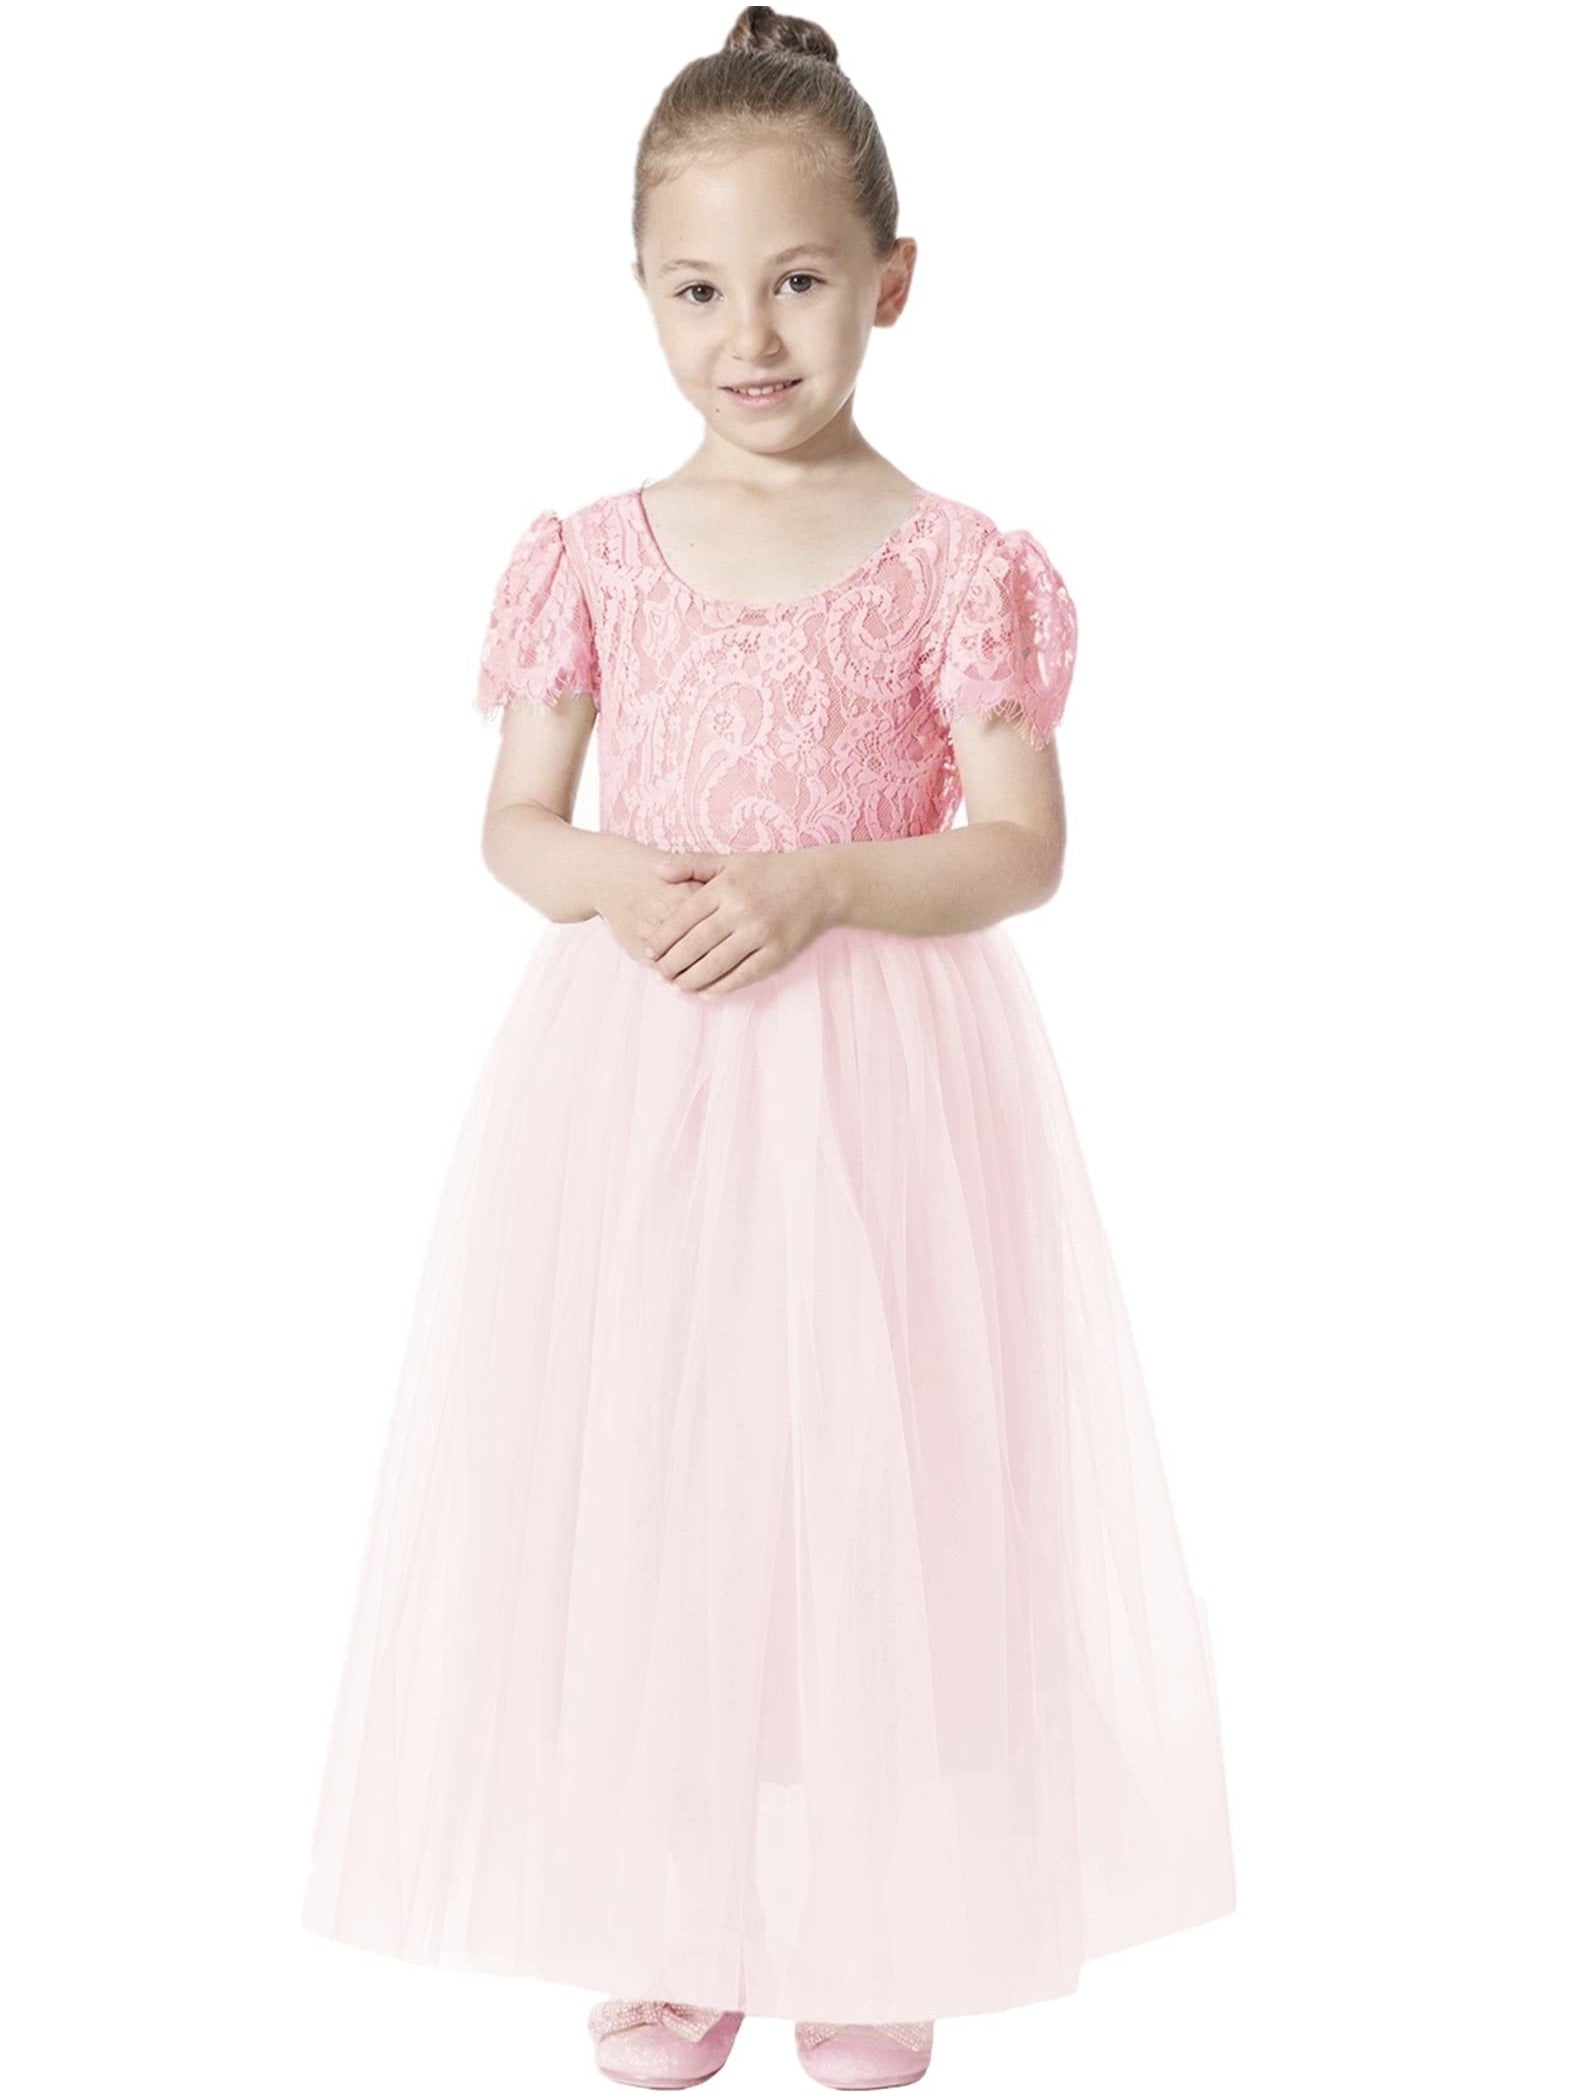 Paisley Lace Flower Girl Dress in Pink two tone